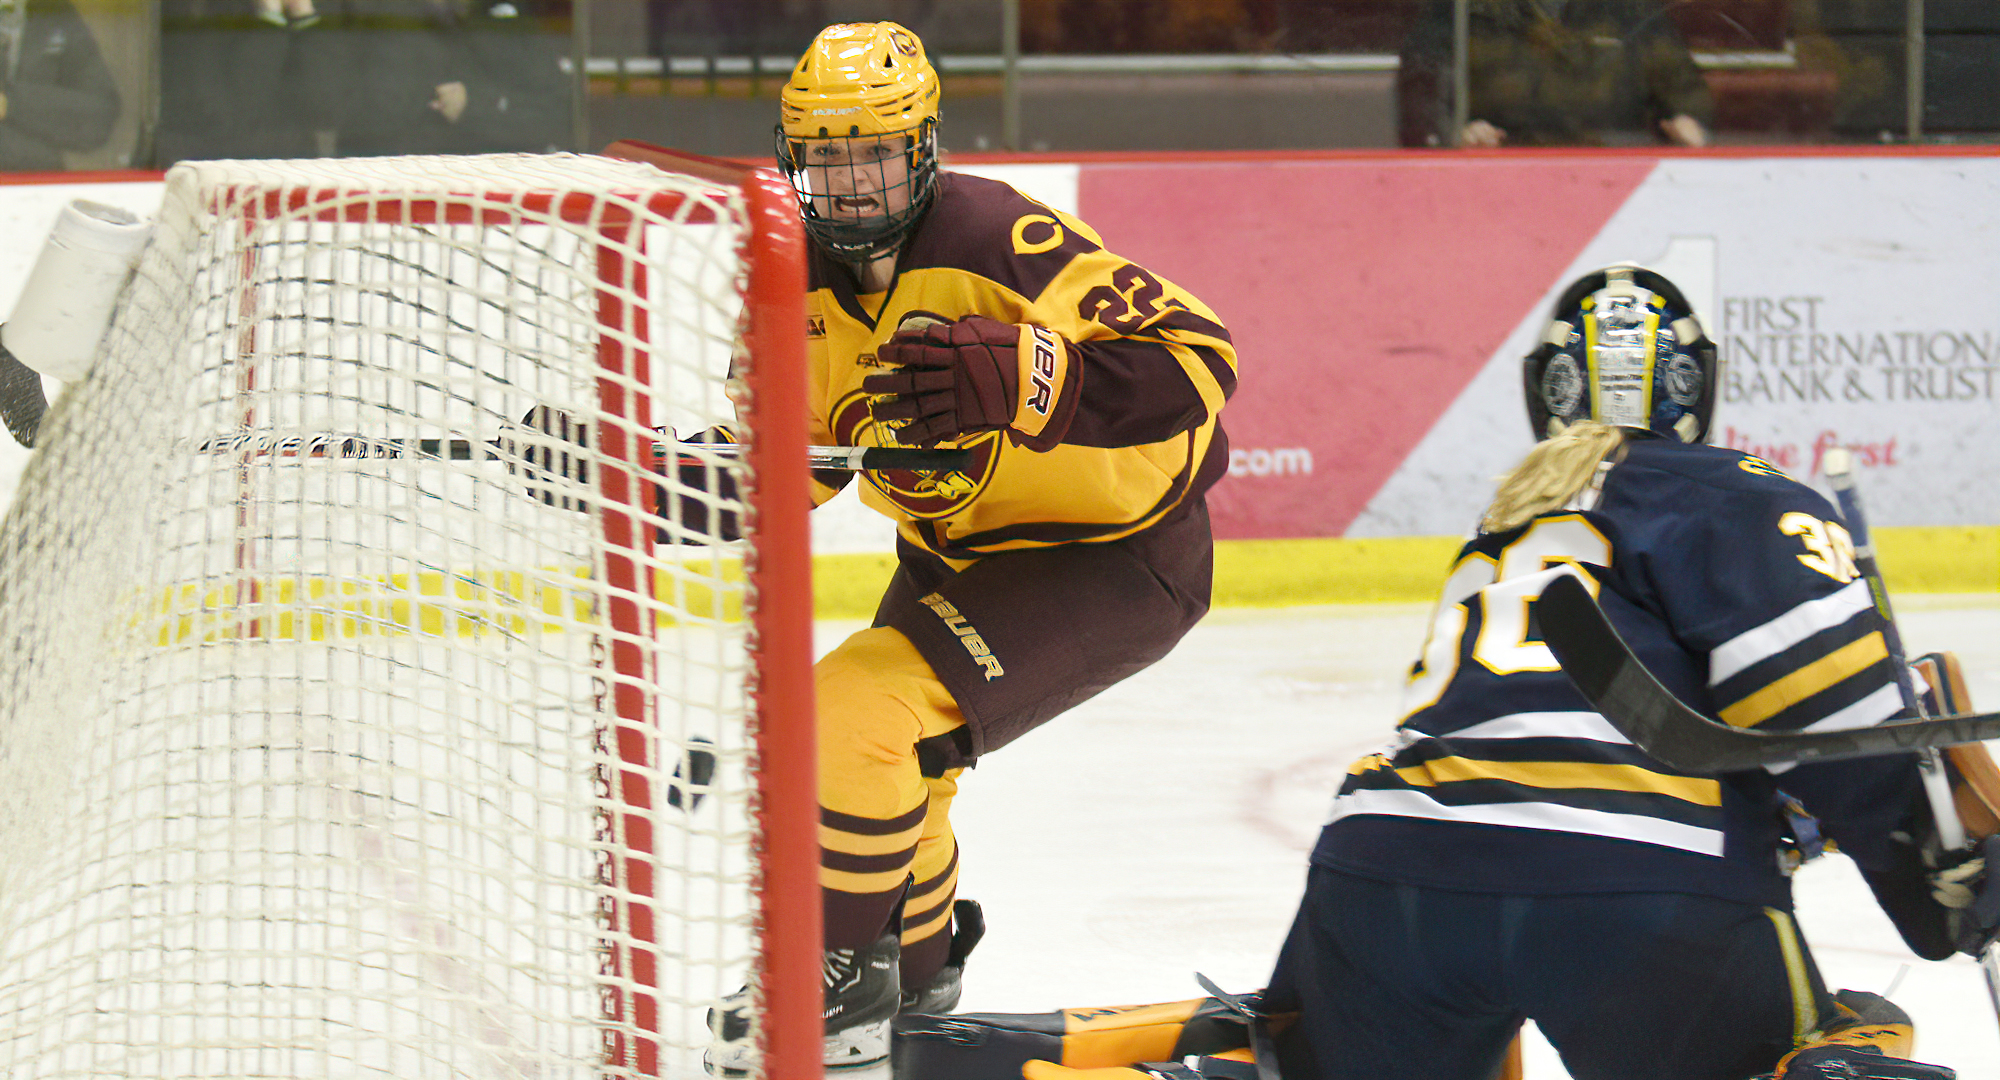 Freshman Morgan Sauvageau watches her shot go into the goal in the second period of the Cobbers' 5-2 win over St. Scholastica in the series finale.